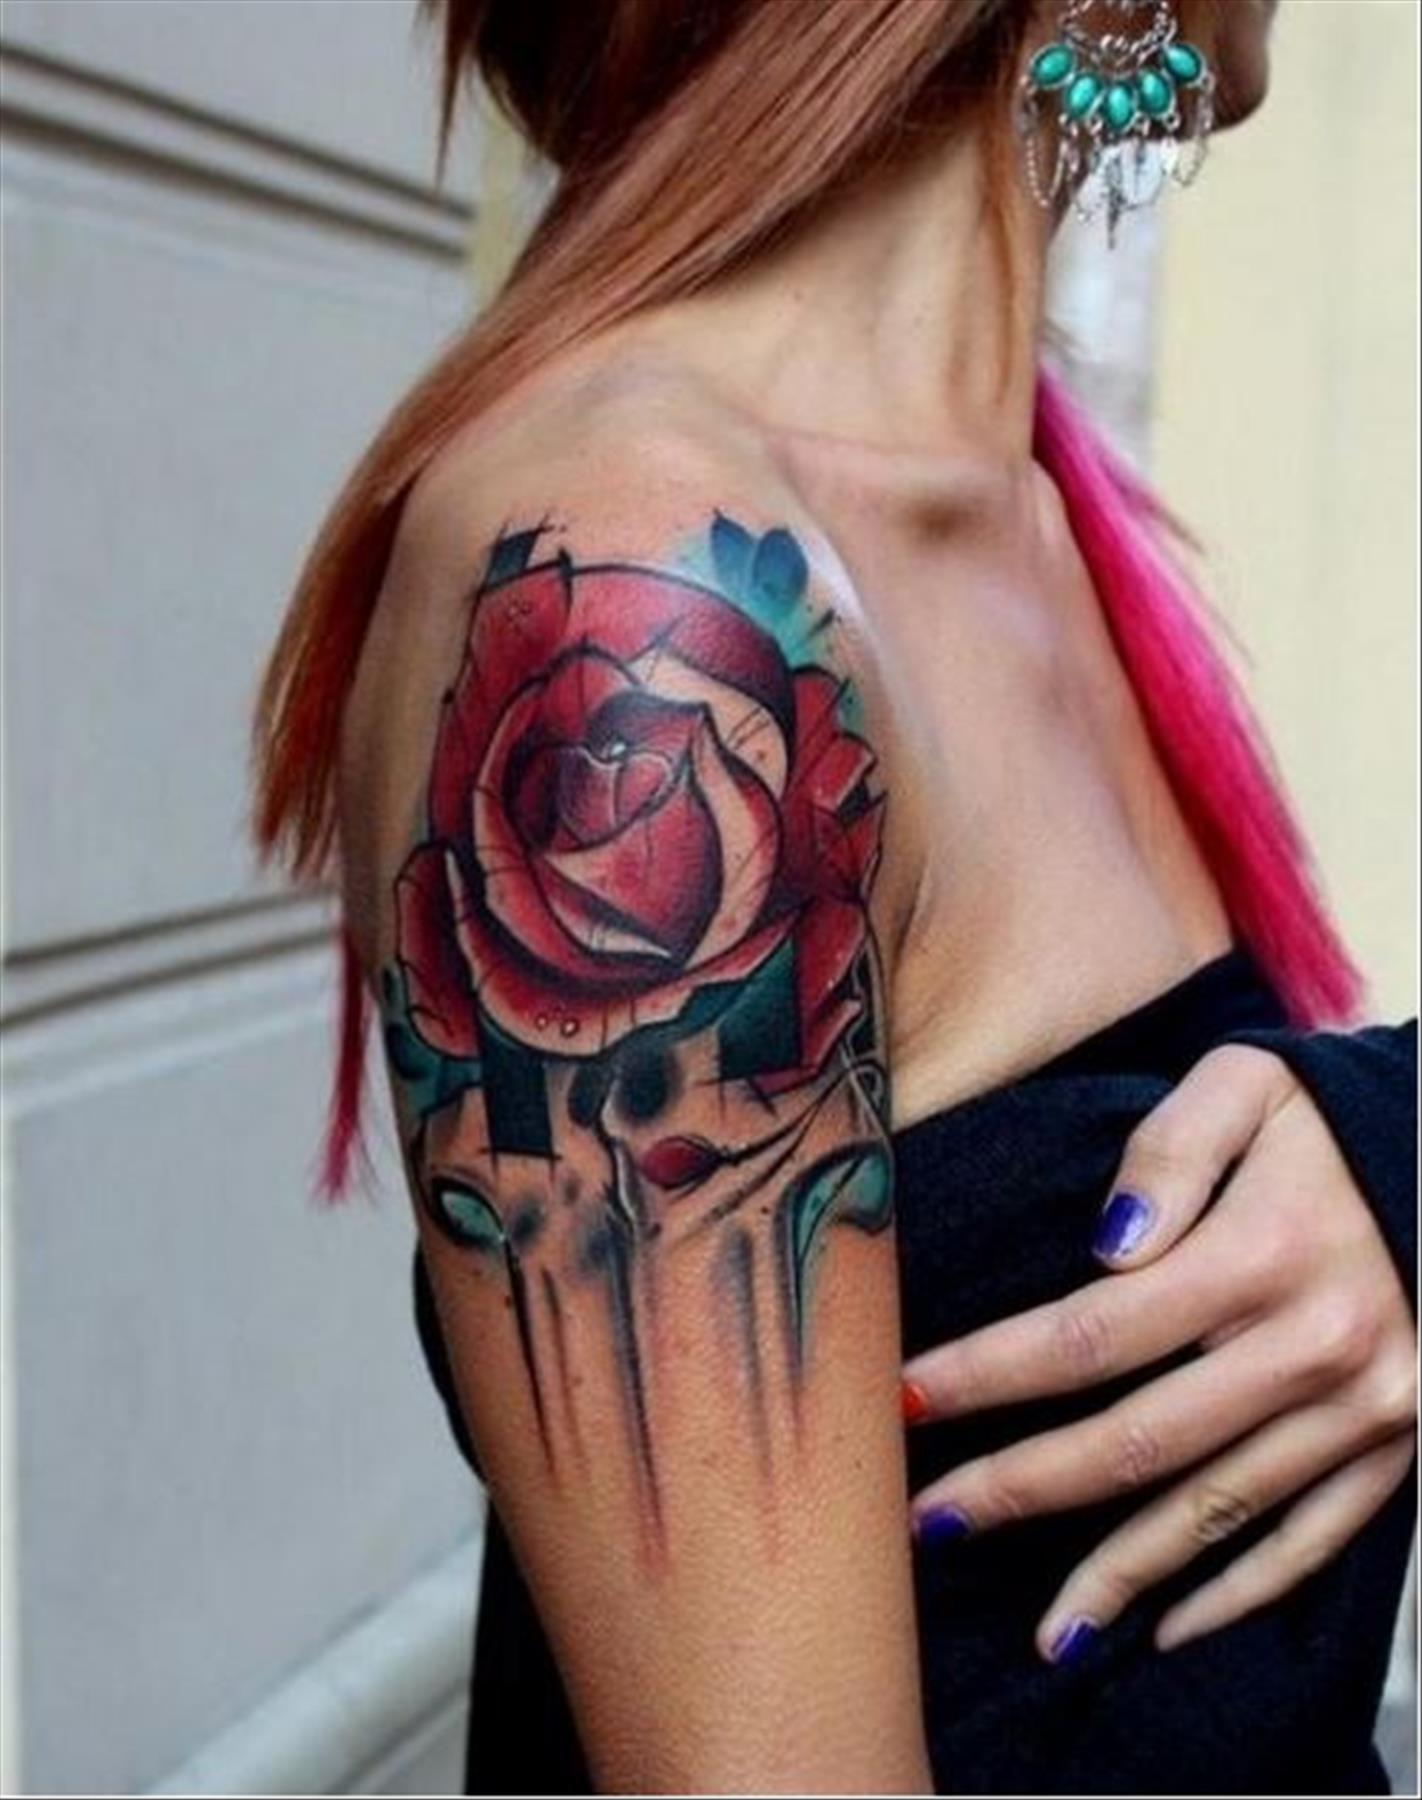 Rose tattoo designs for your first tattoo attempt